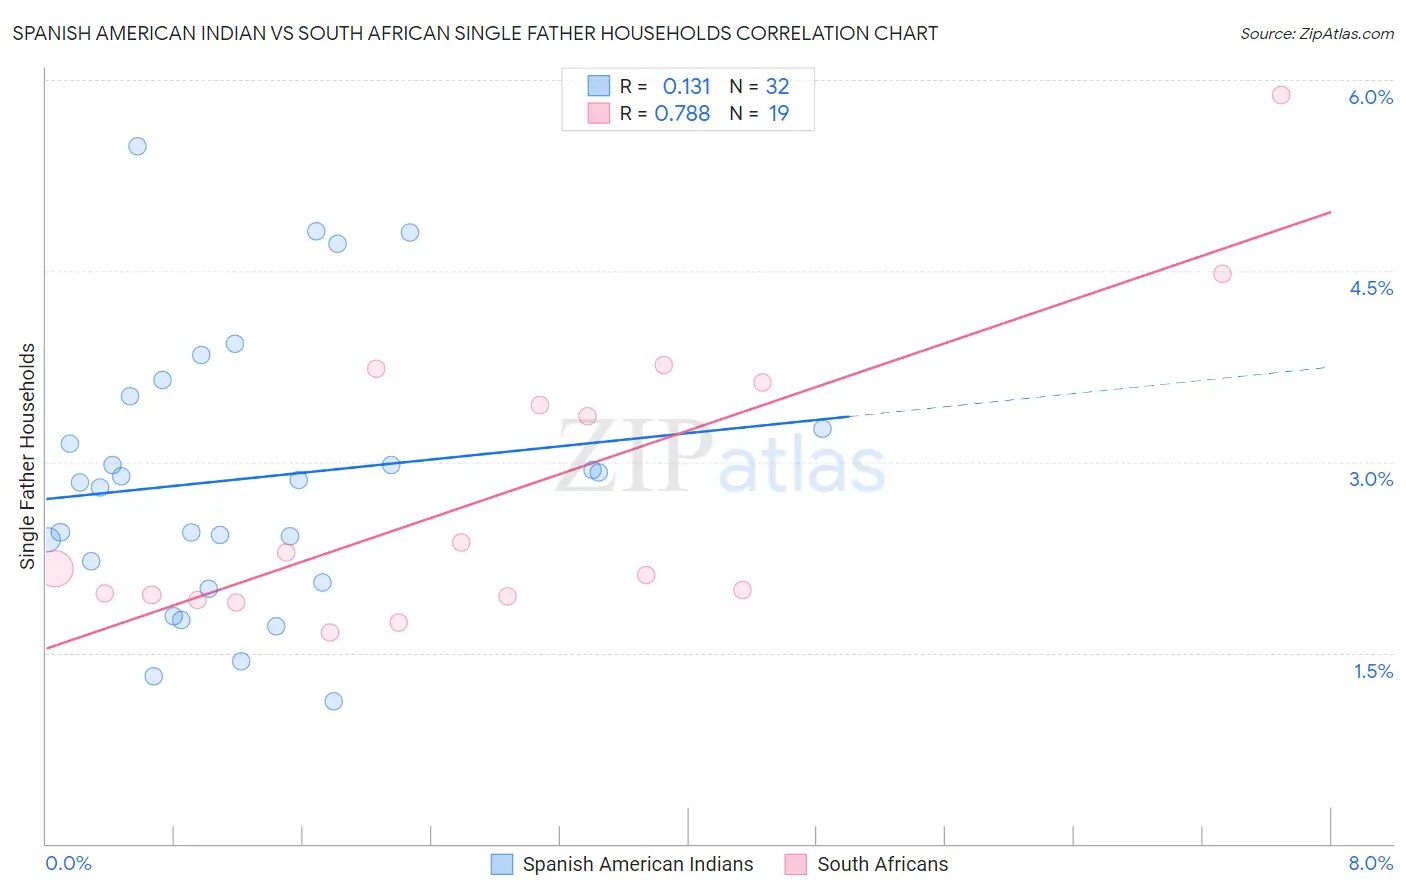 Spanish American Indian vs South African Single Father Households